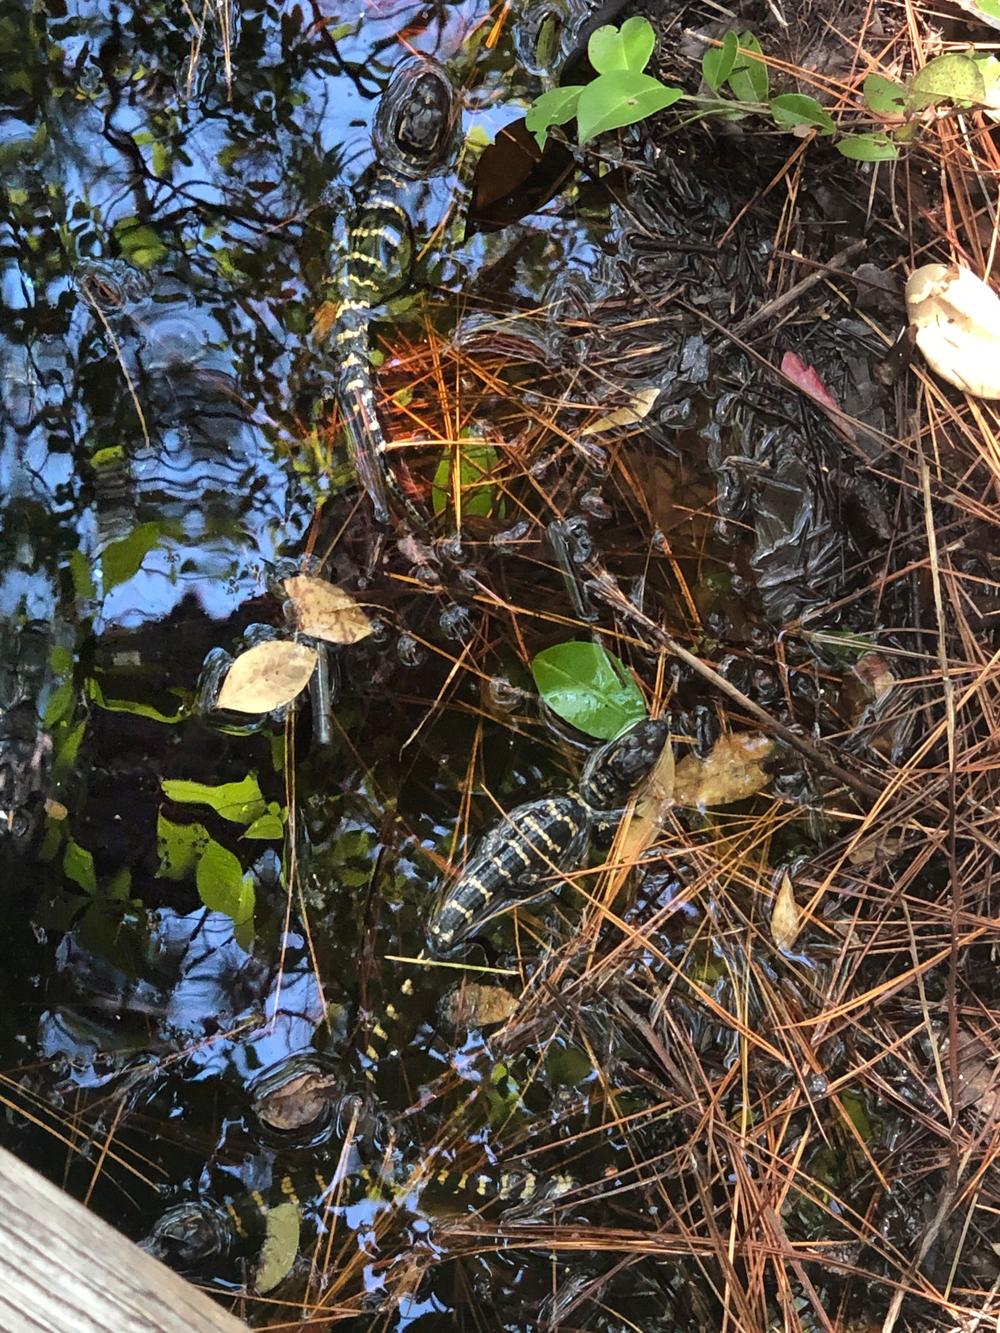 Alligator hatchlings swim in their home in the Okefenokee Swamp.